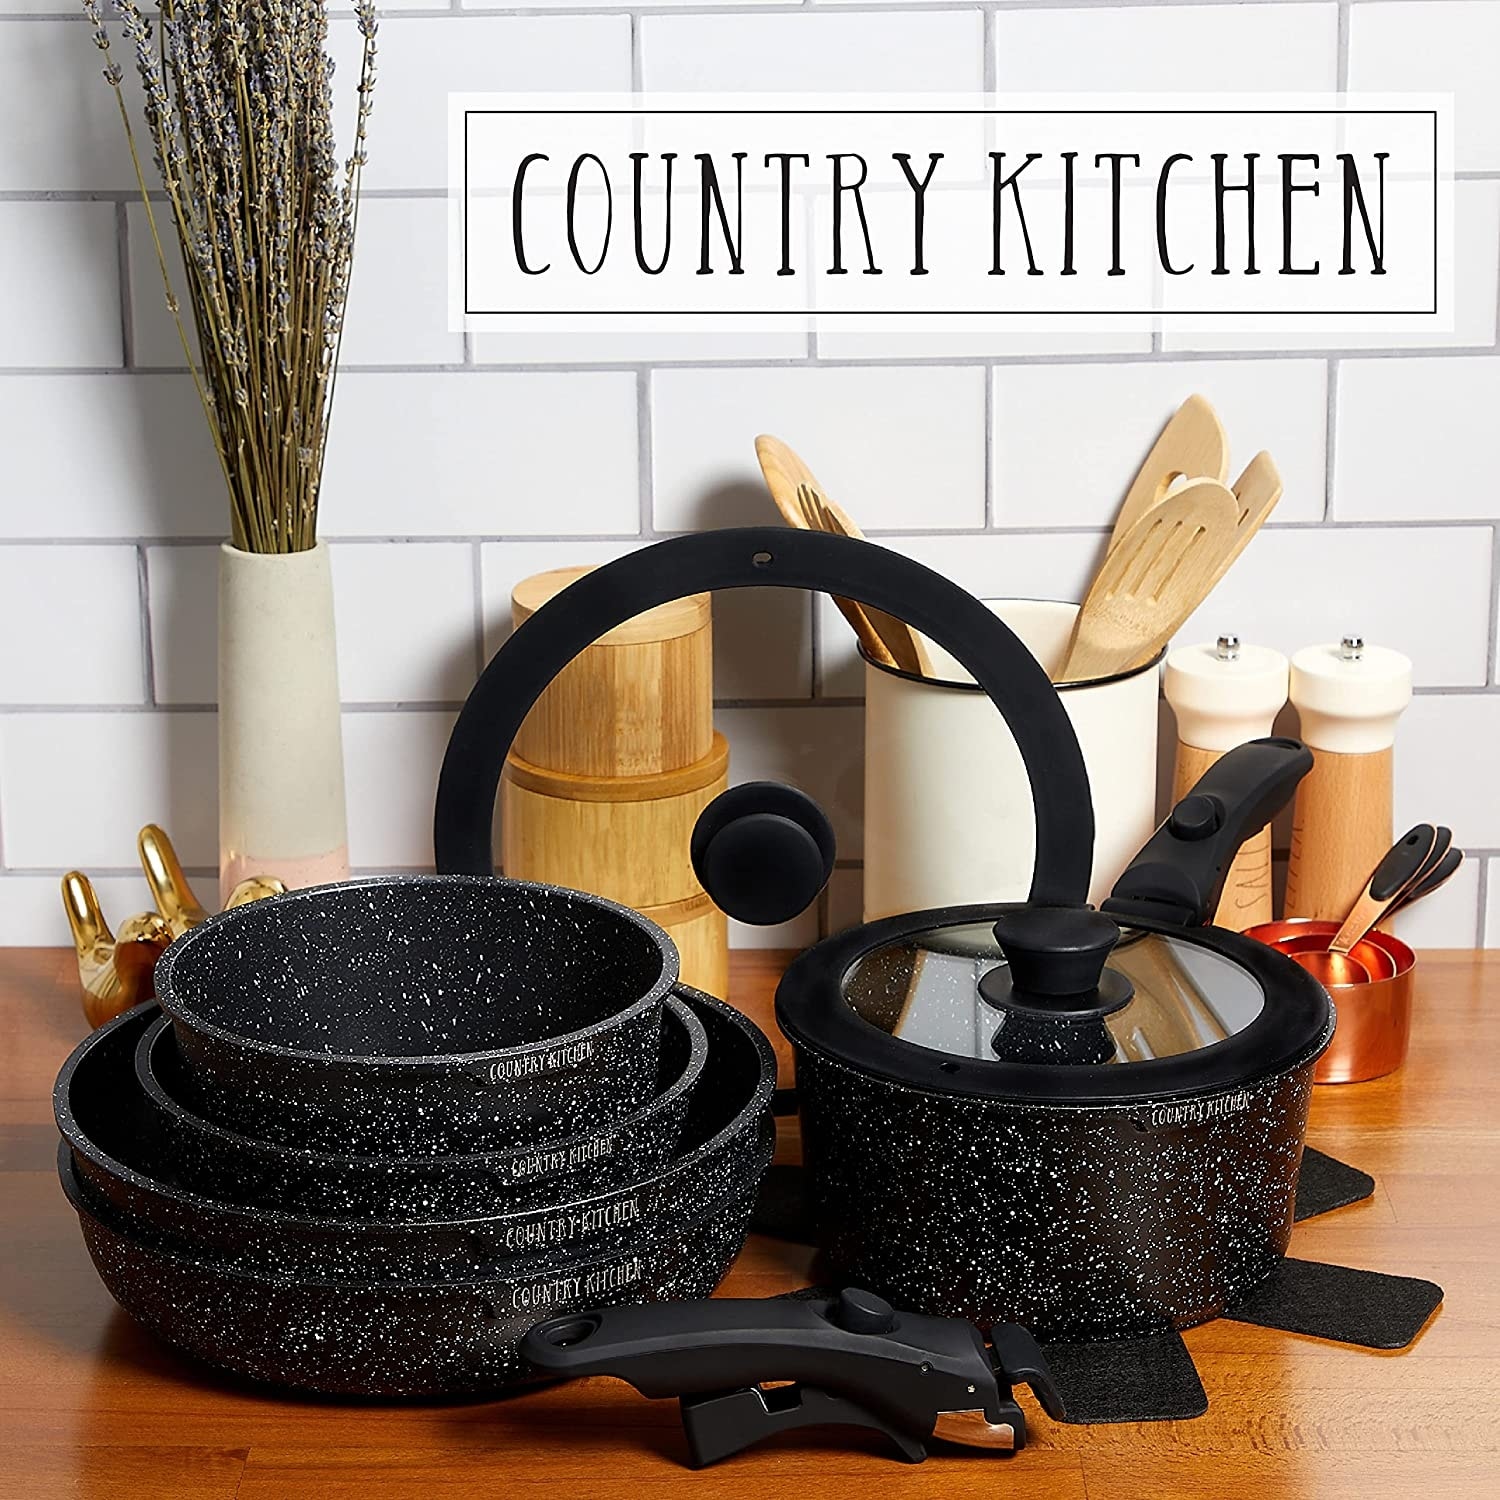 Country Kitchen Pots and Pans Set Nonstick, 6 Piece Cookware Sets, Beige